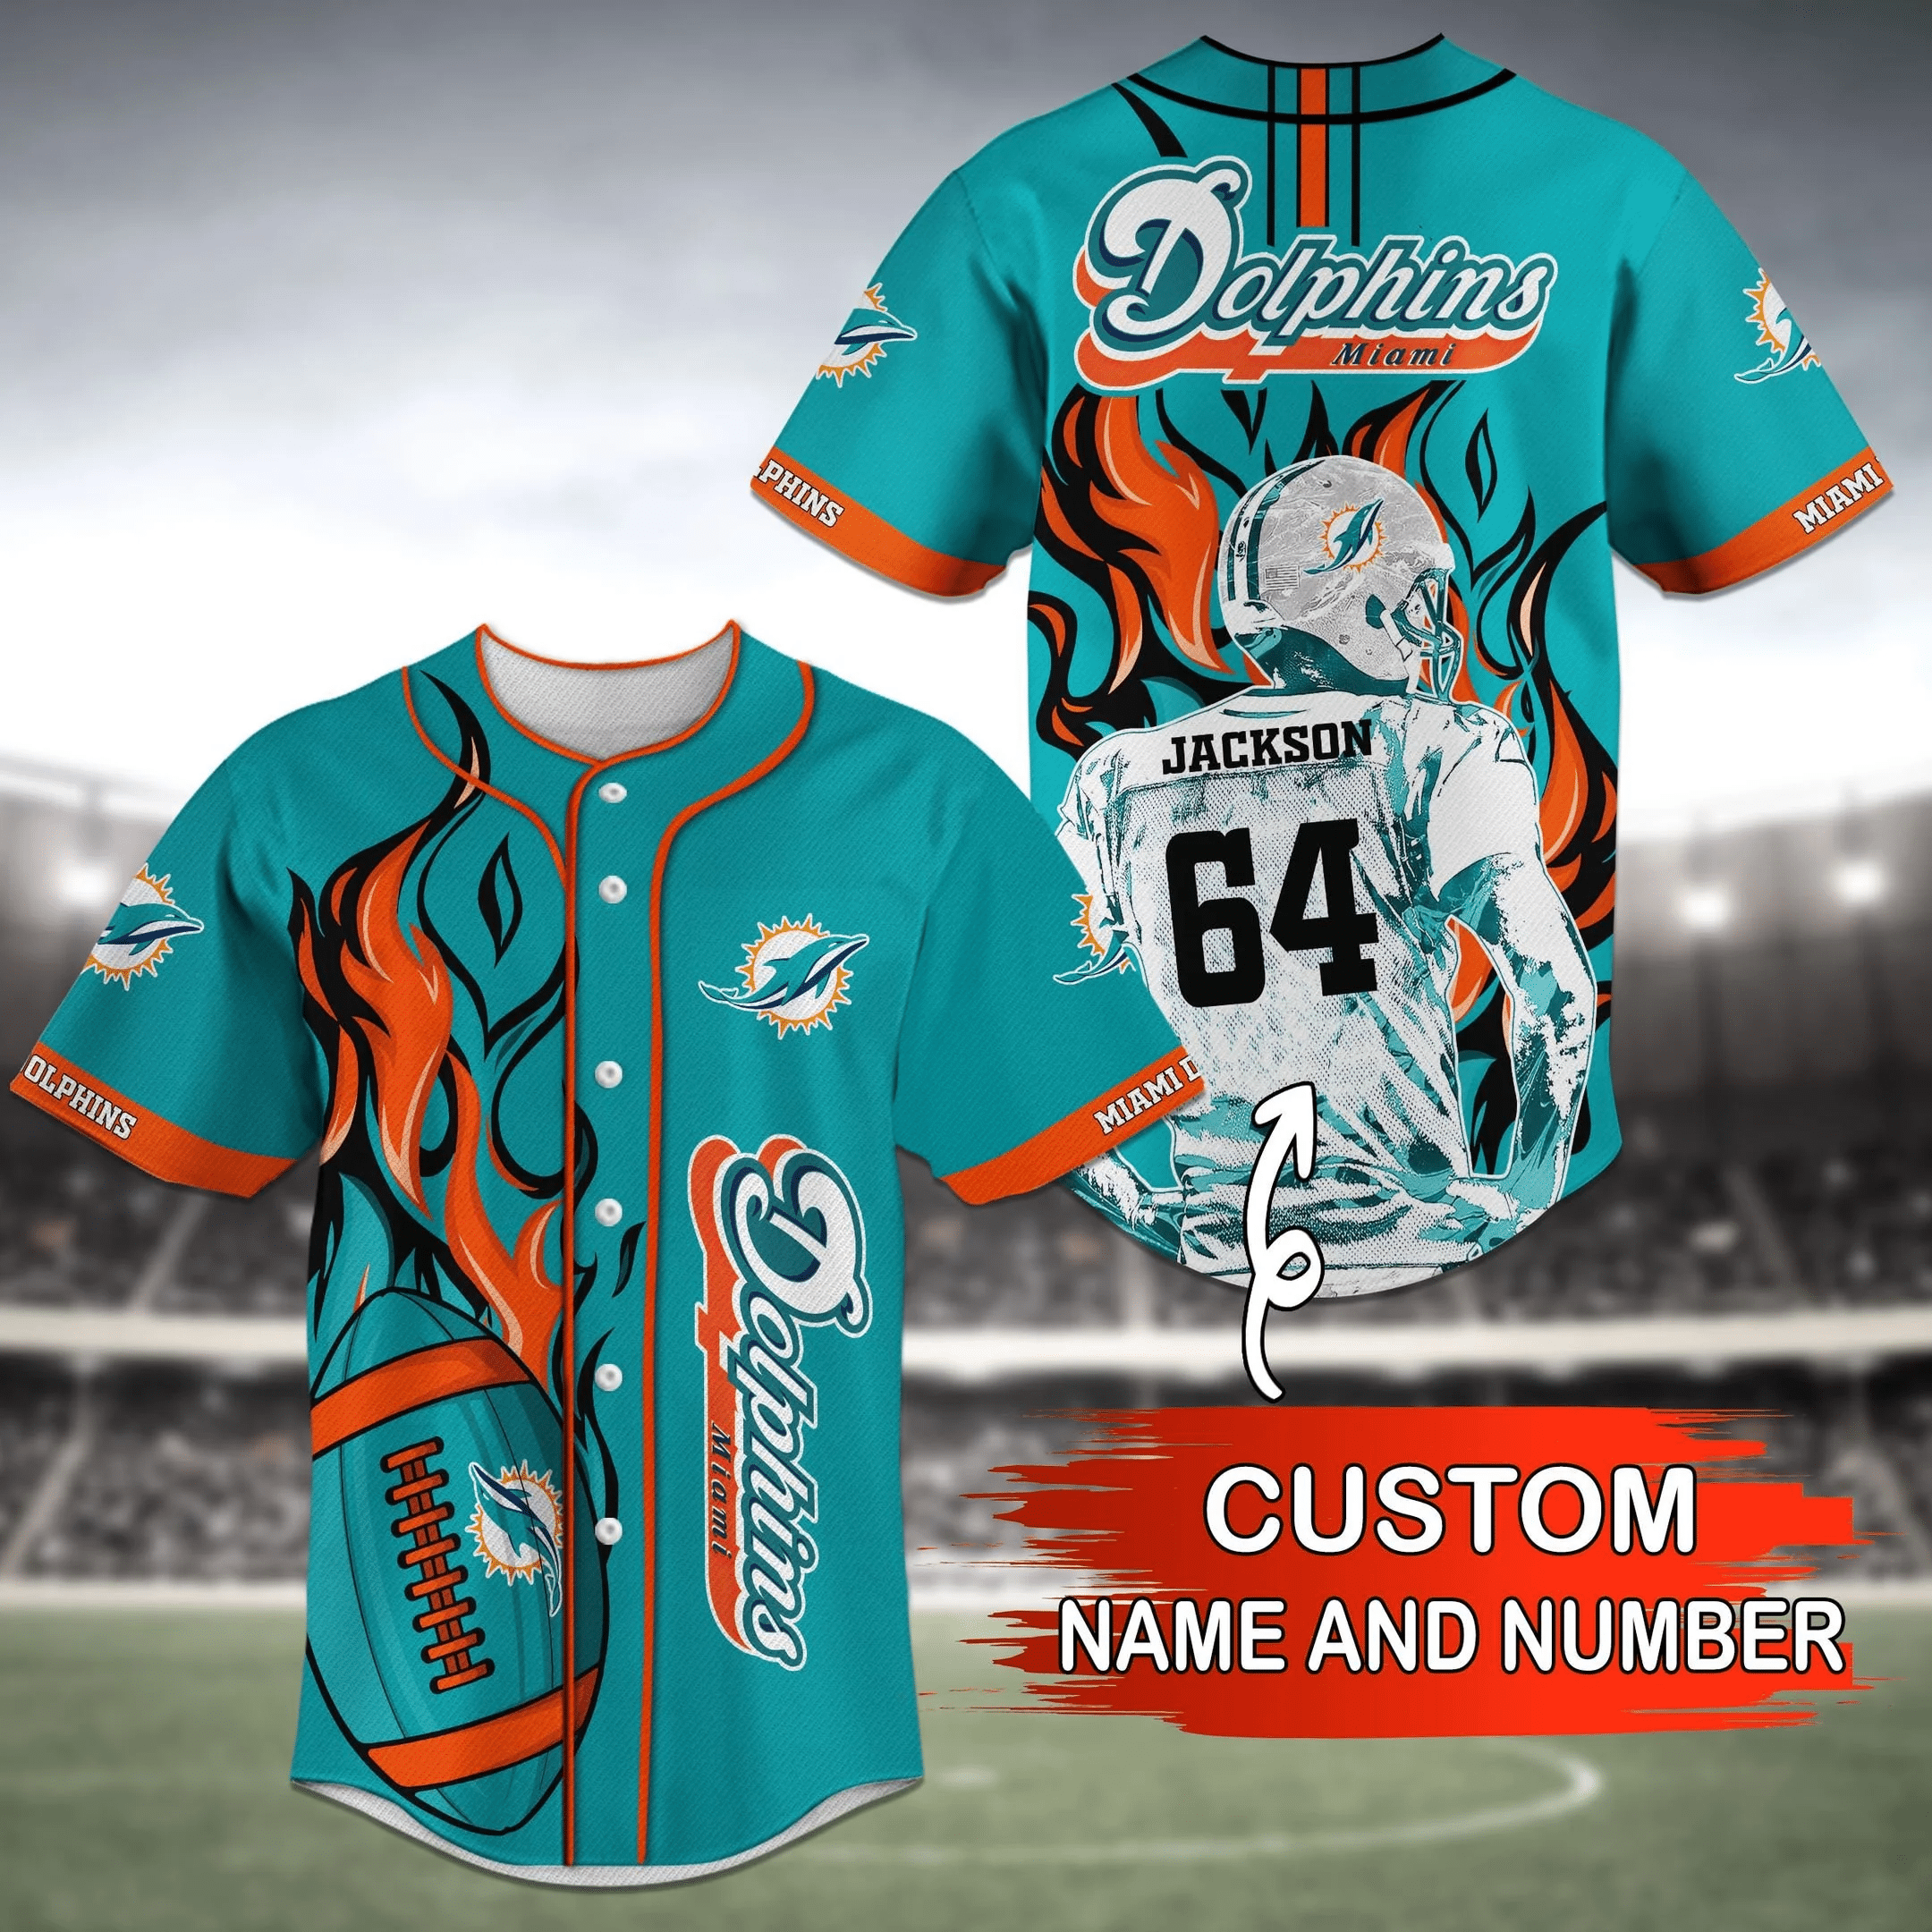 Miami Dolphins NFL Personalized Custom Name Baseball Jersey Shirt